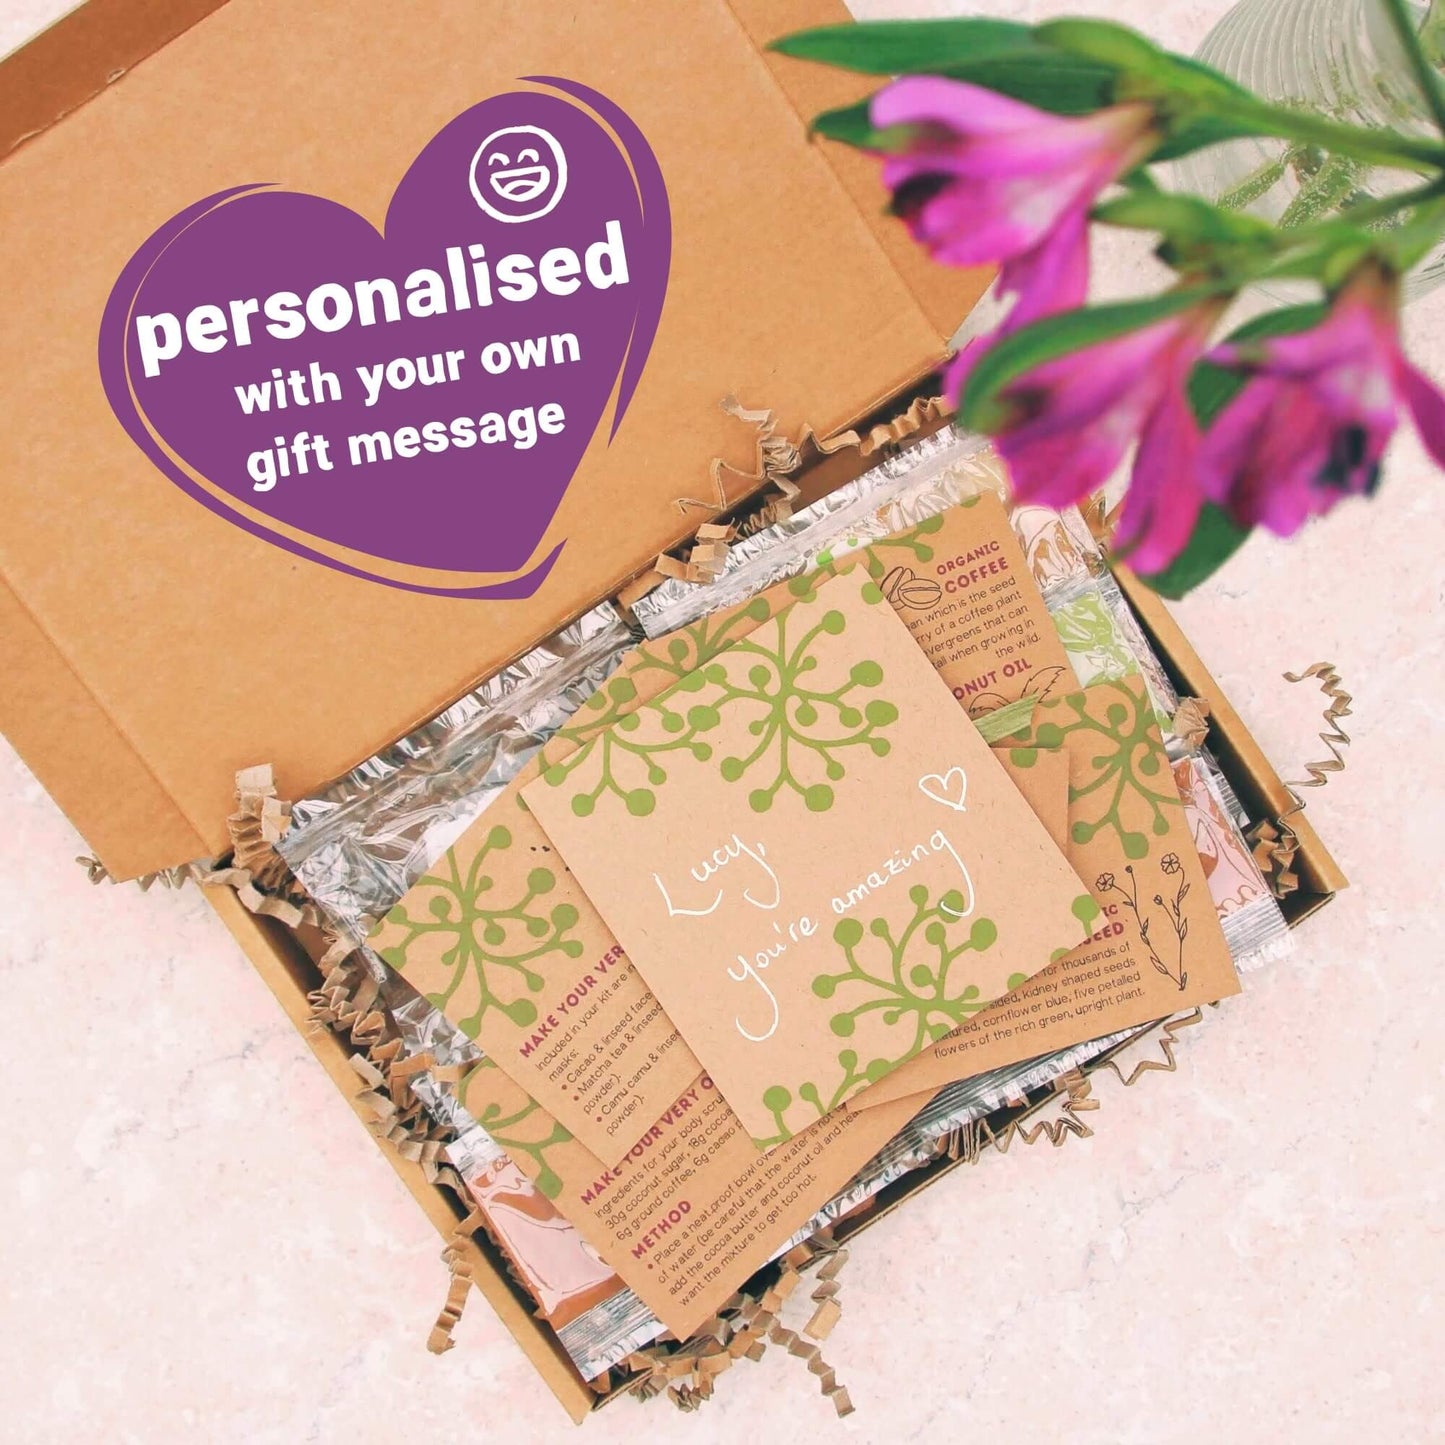 personalised gift message inside employee gift box